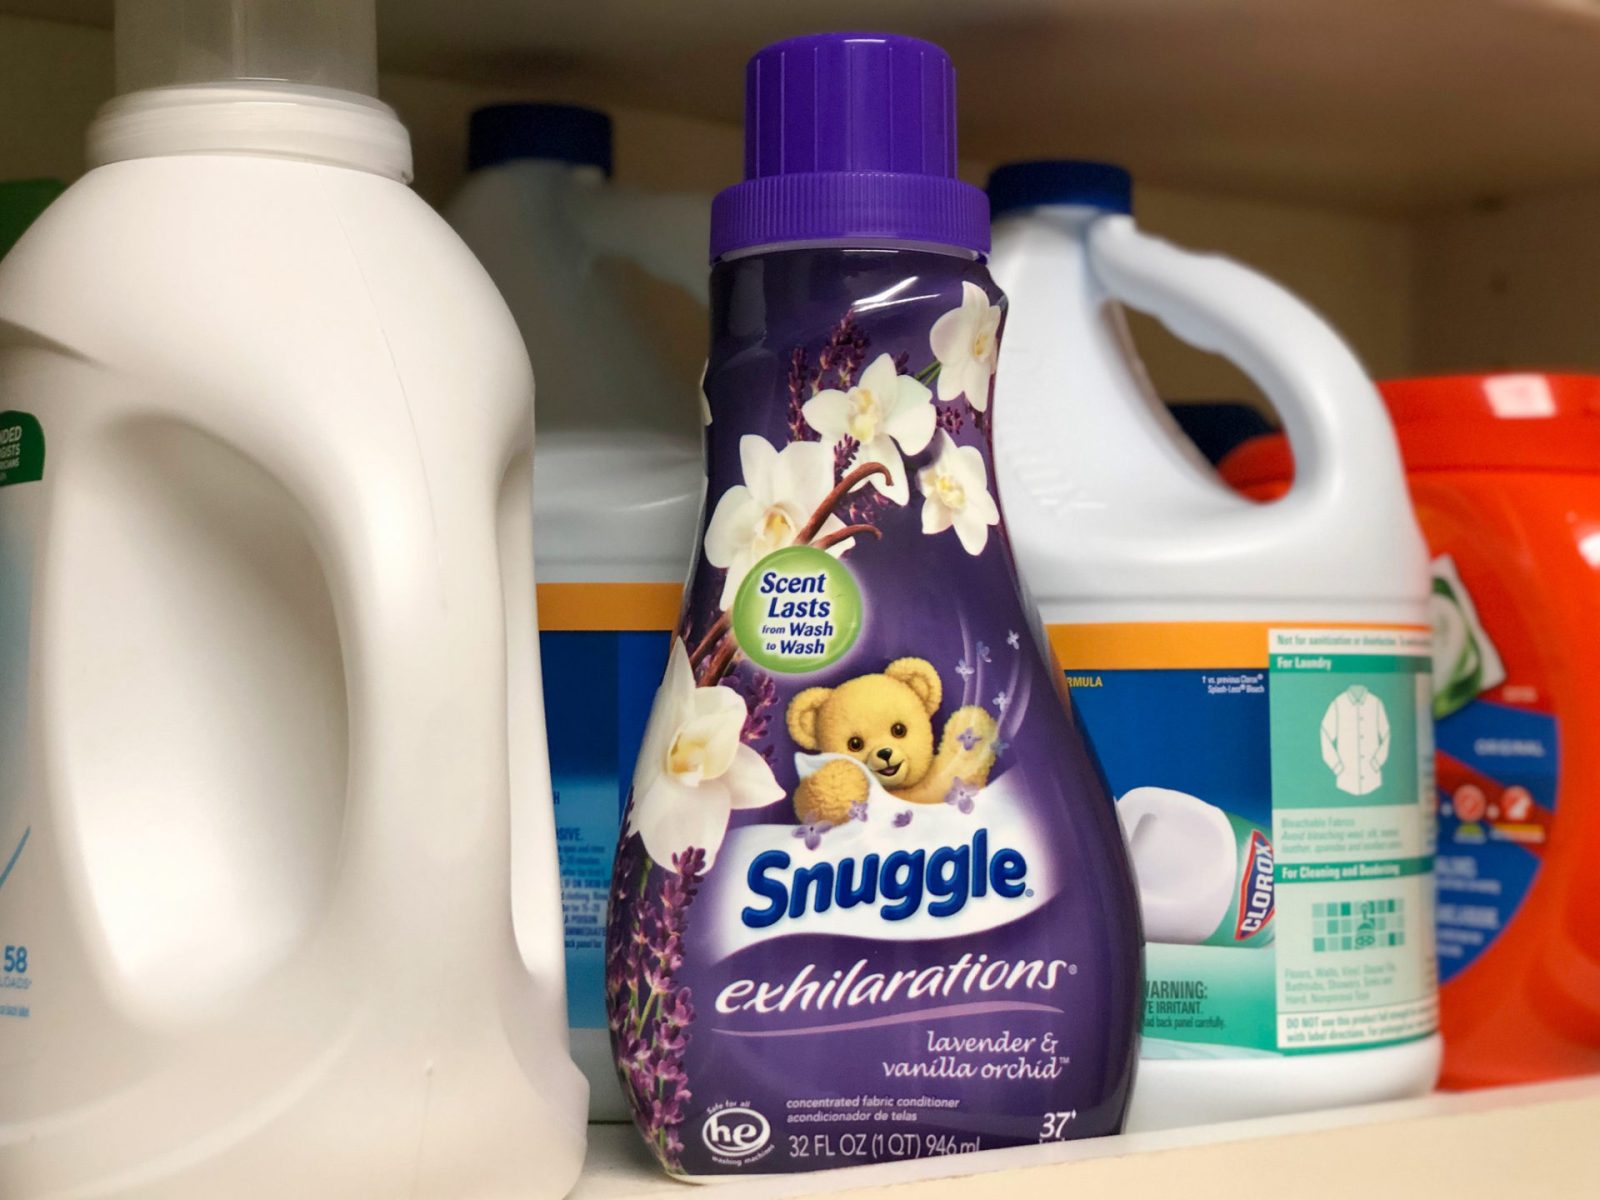 Snuggle Fabric Softener As Low As $2.99 At Kroger